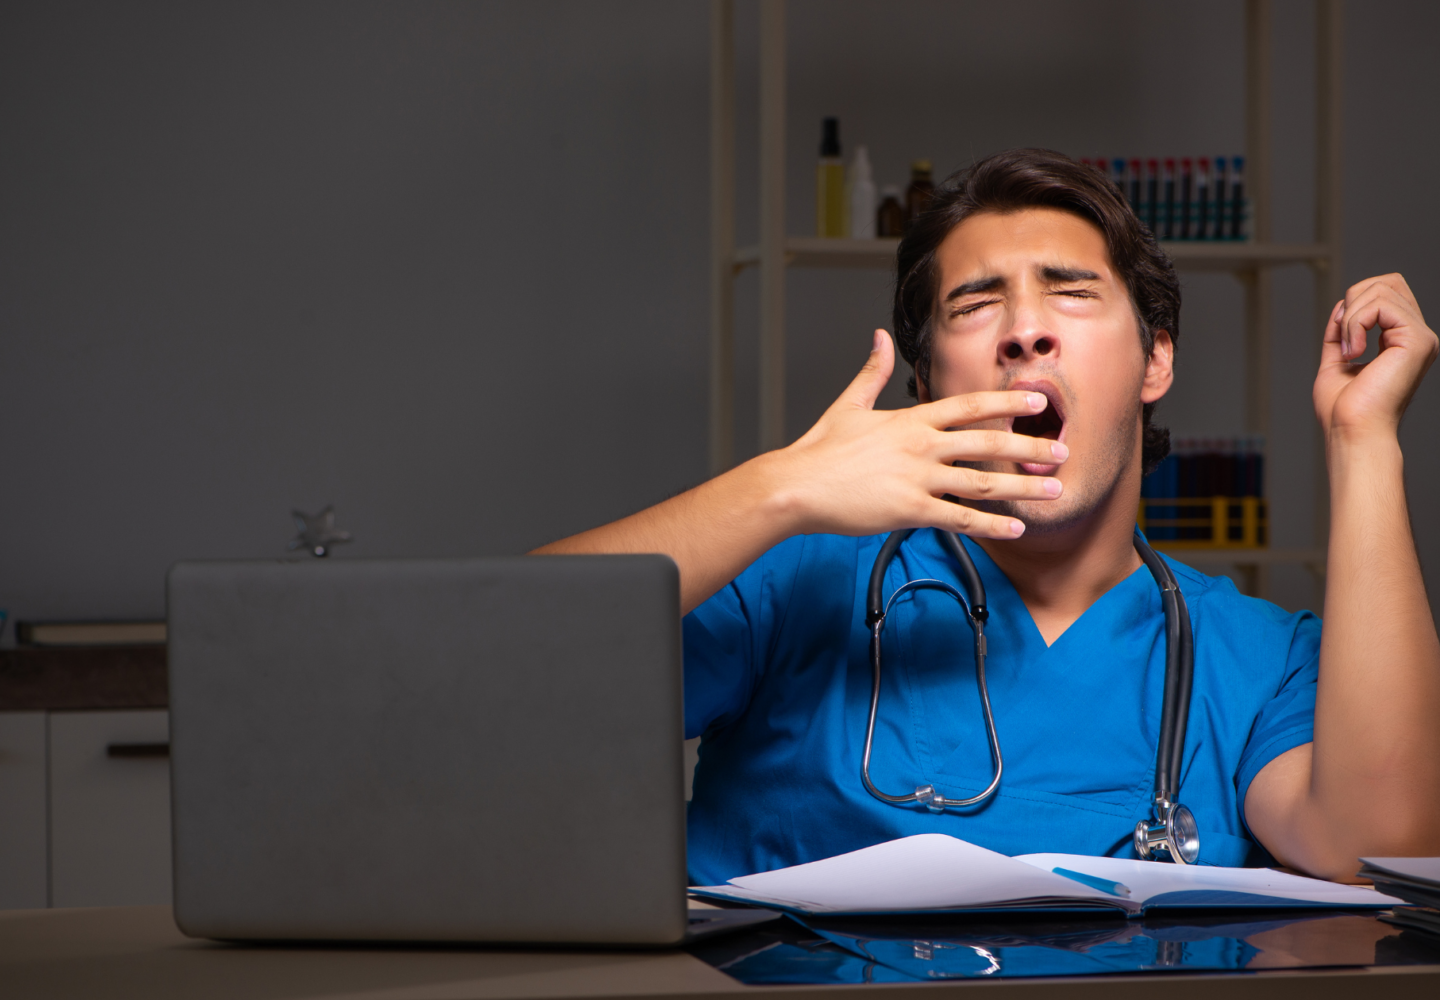 an image depicting a yawning doctor